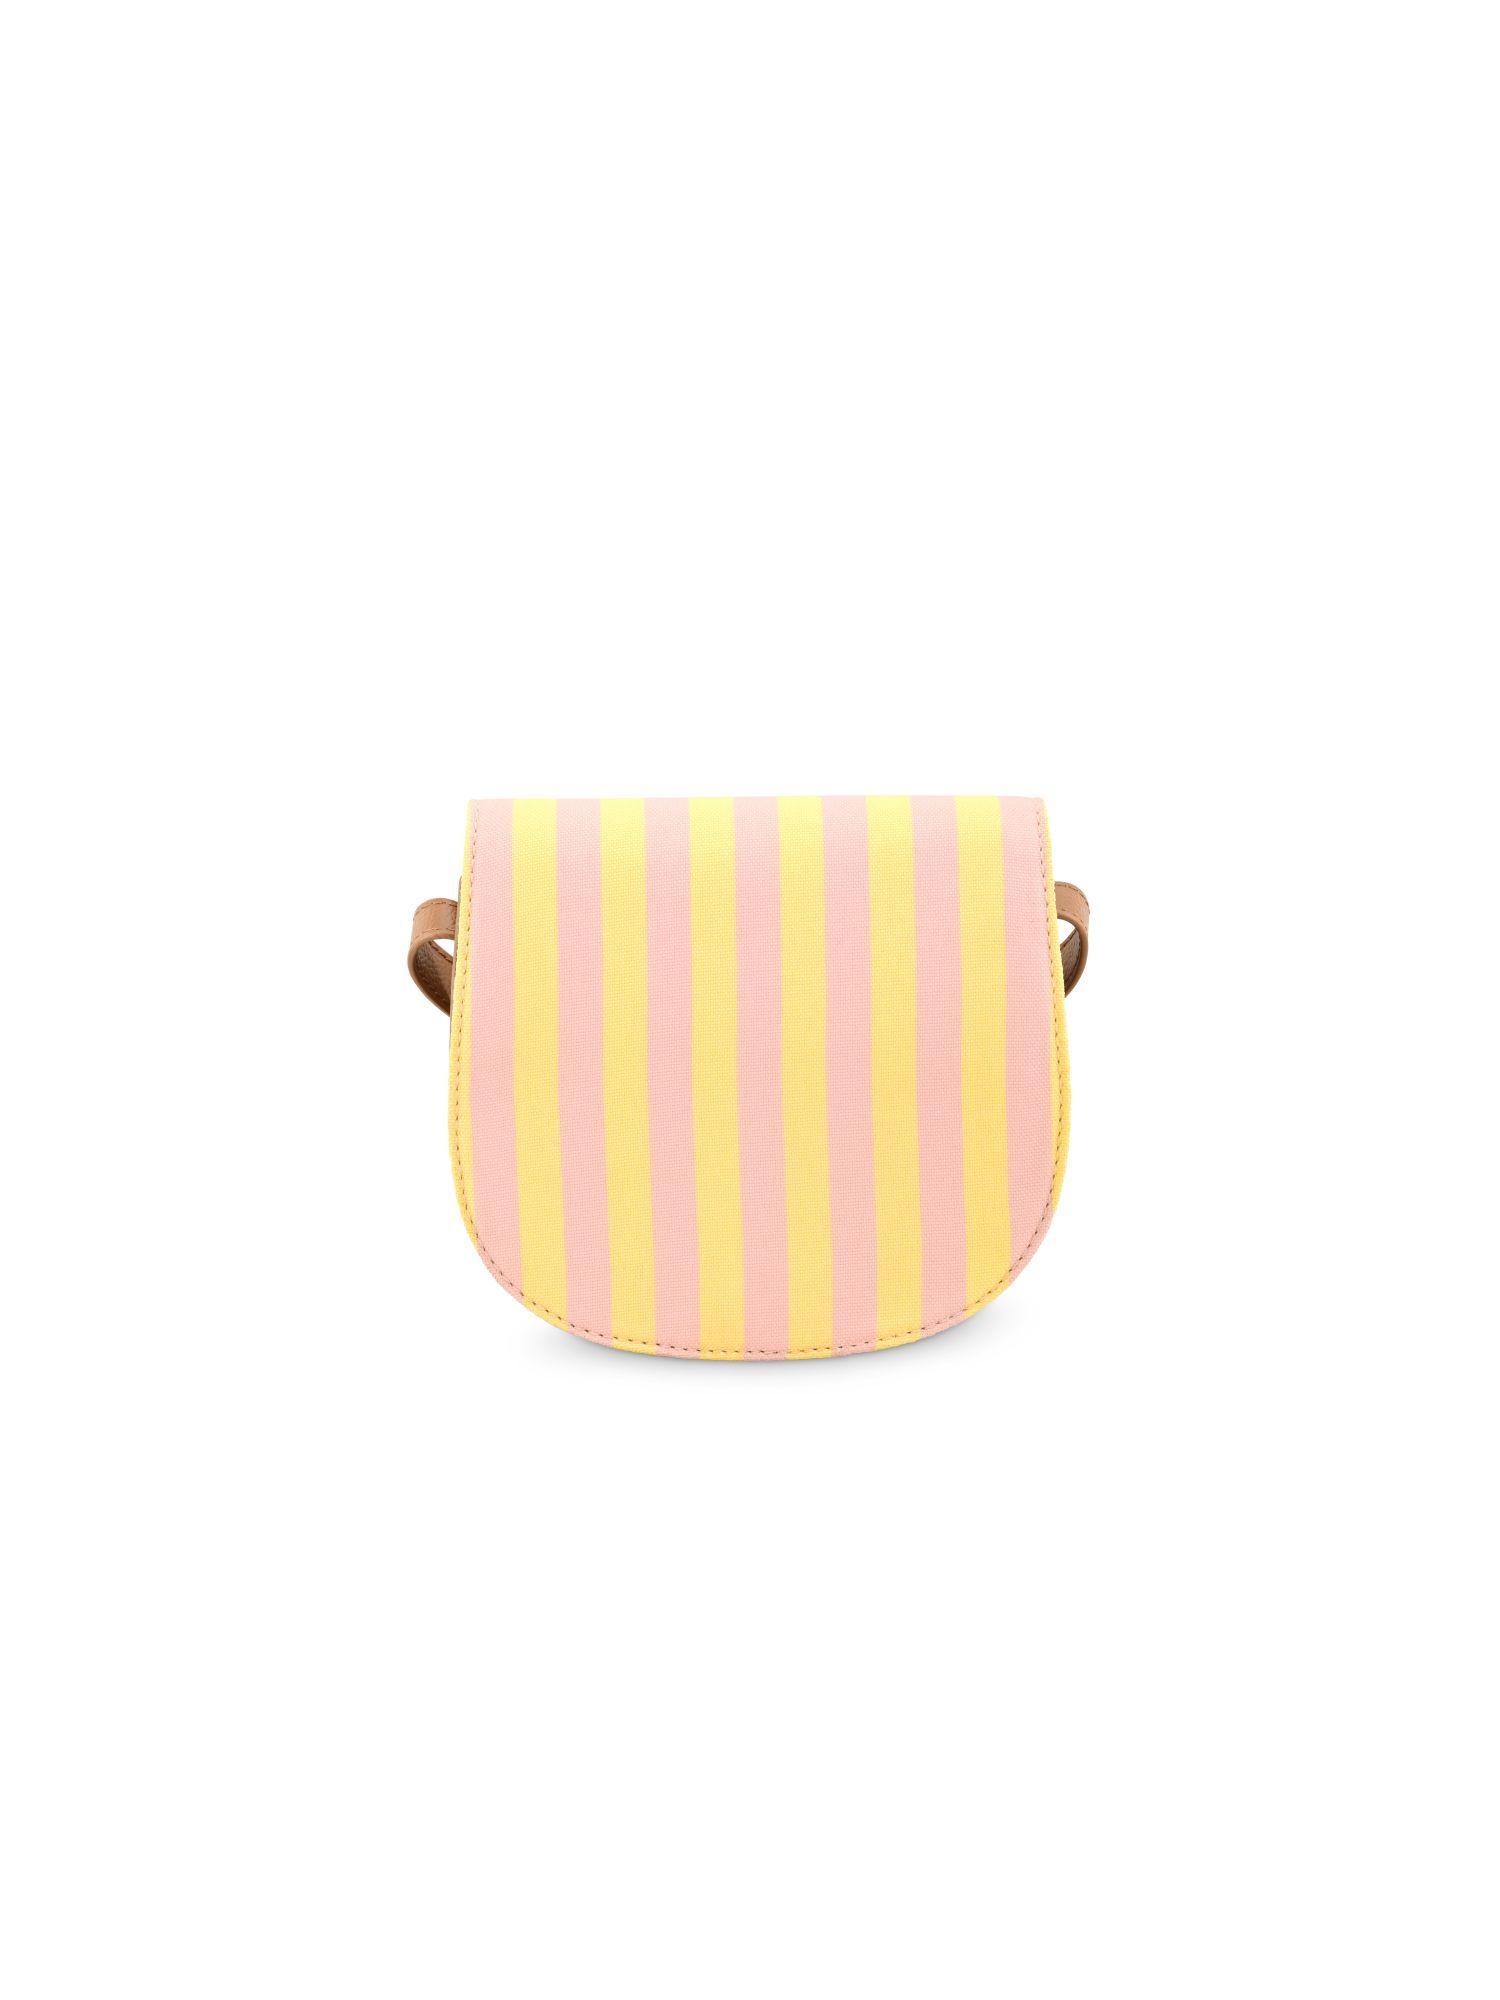 pink and yellow nautical striped casual sling bag for women